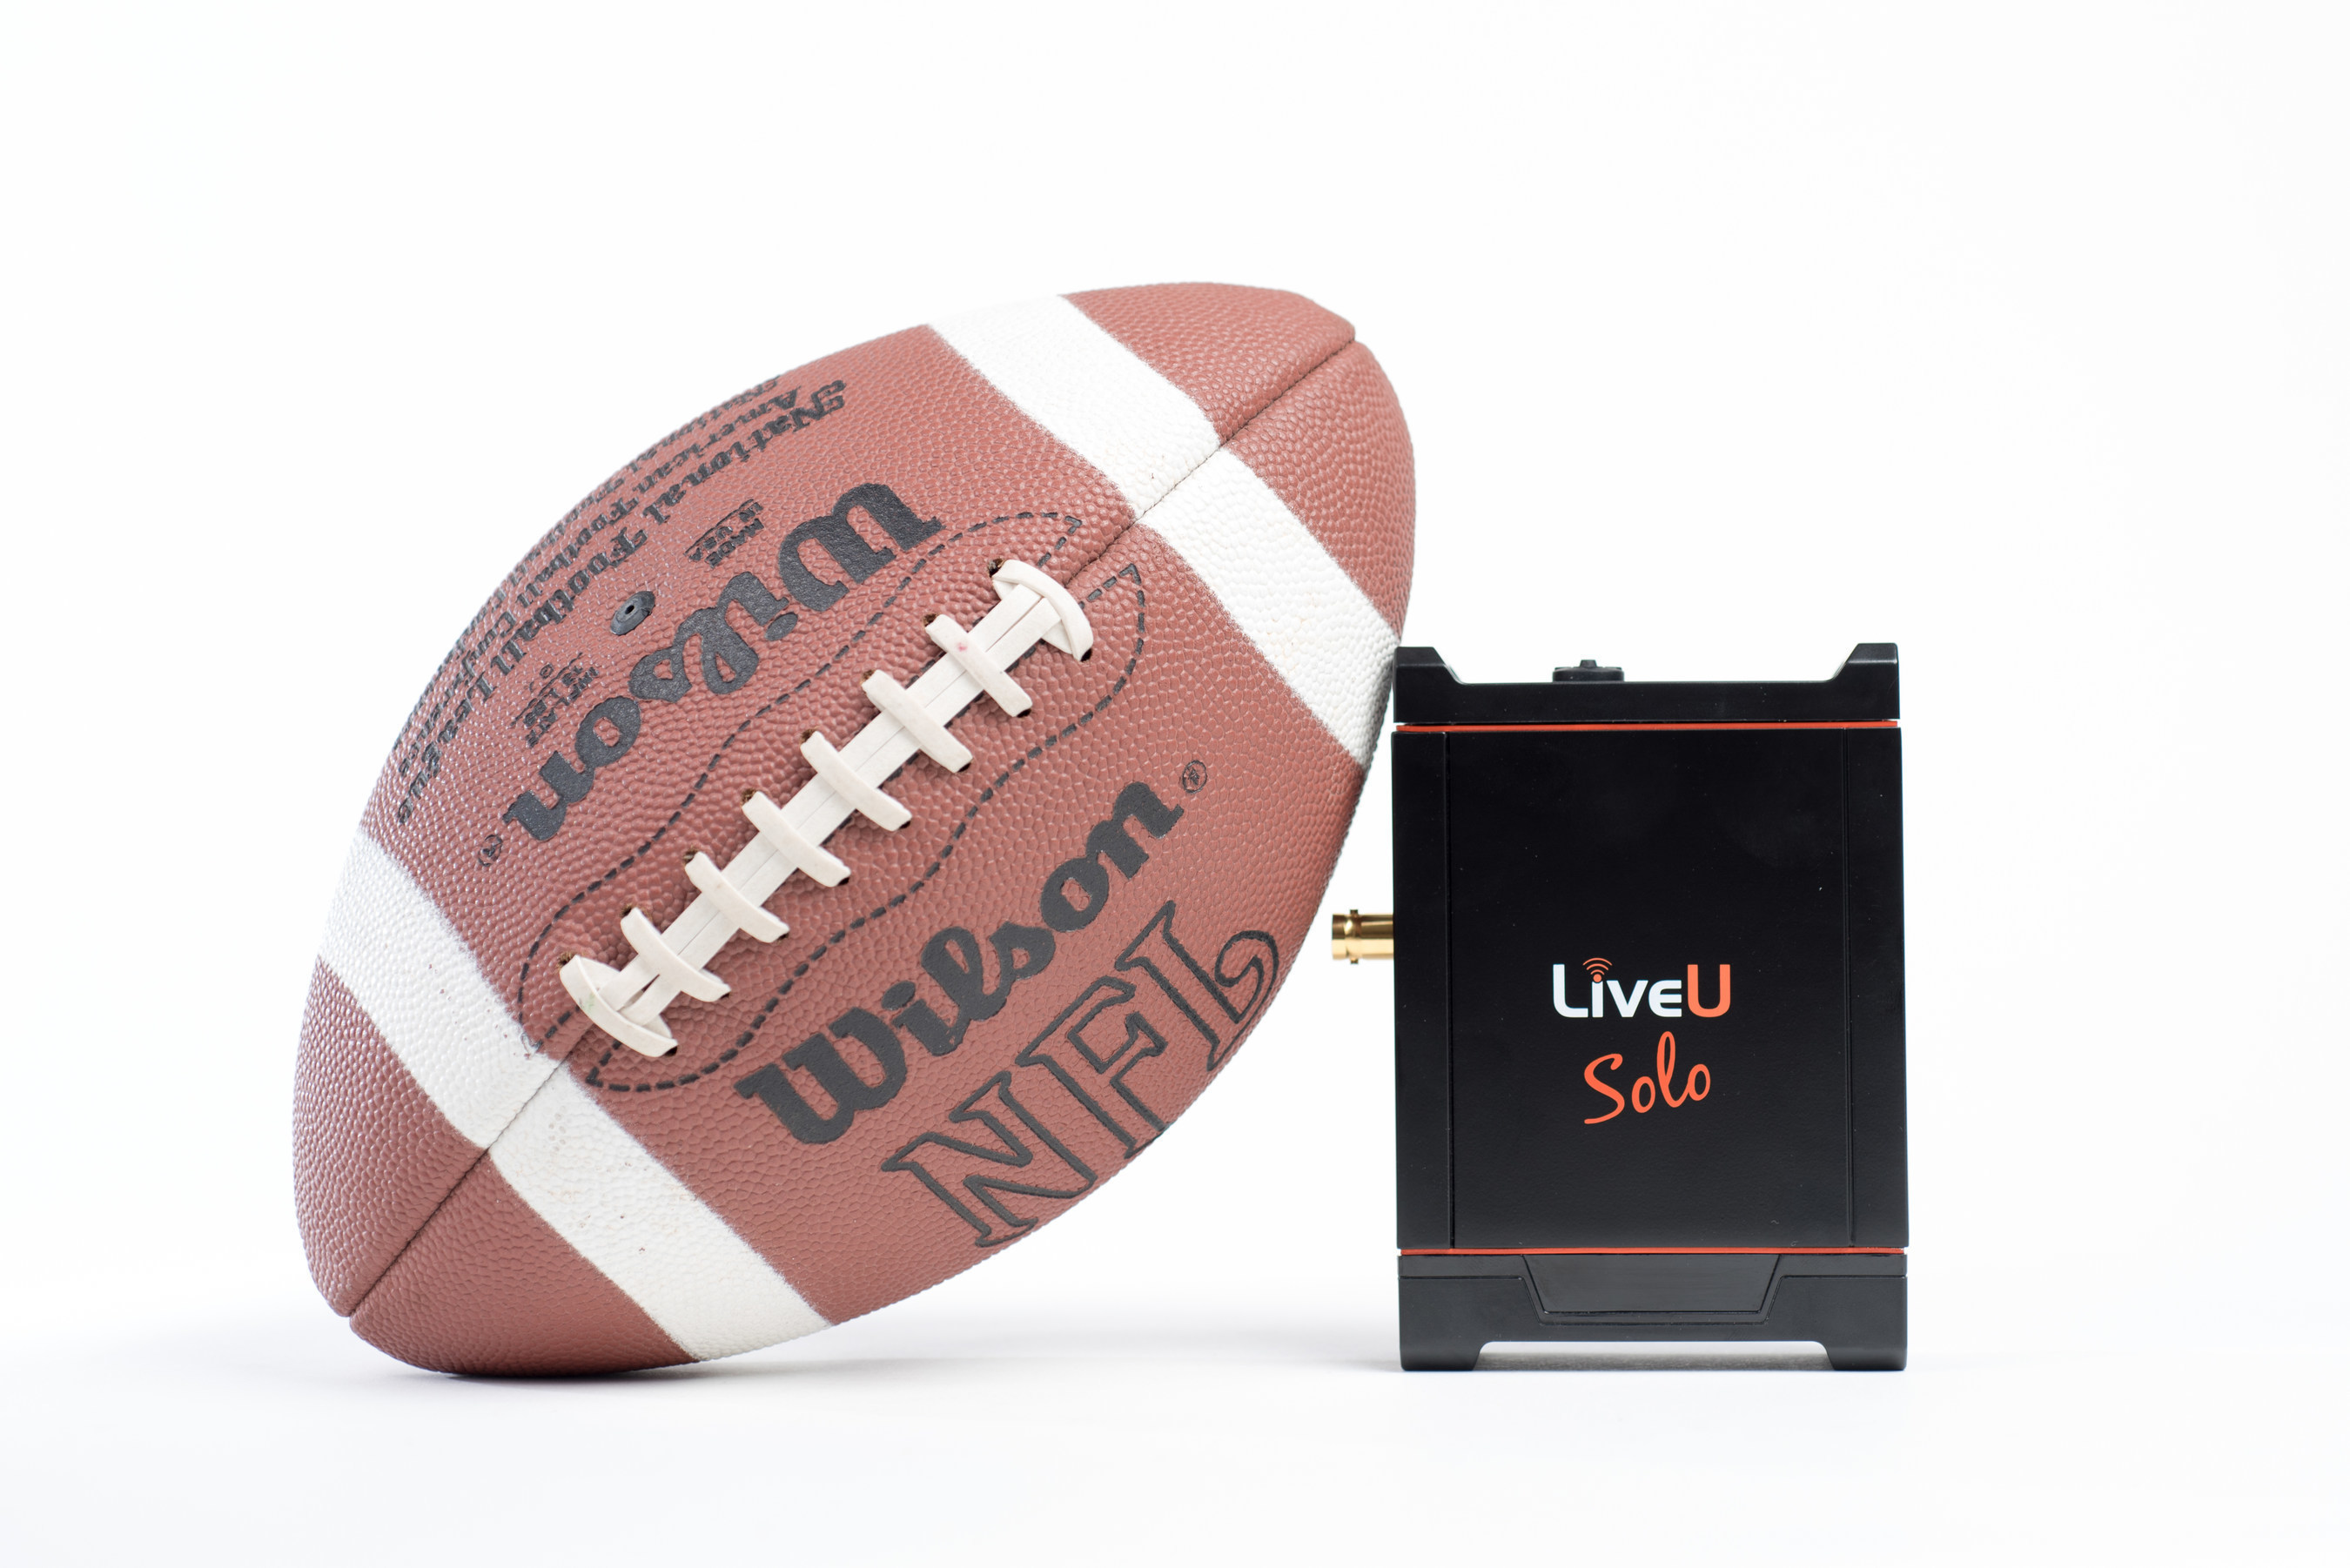 LiveU, the pioneer and leader in IP-based live video services and broadcast solutions, will exhibit its new plug-and-play live streaming bonded solution, LiveU Solo, for the first time in the United States.